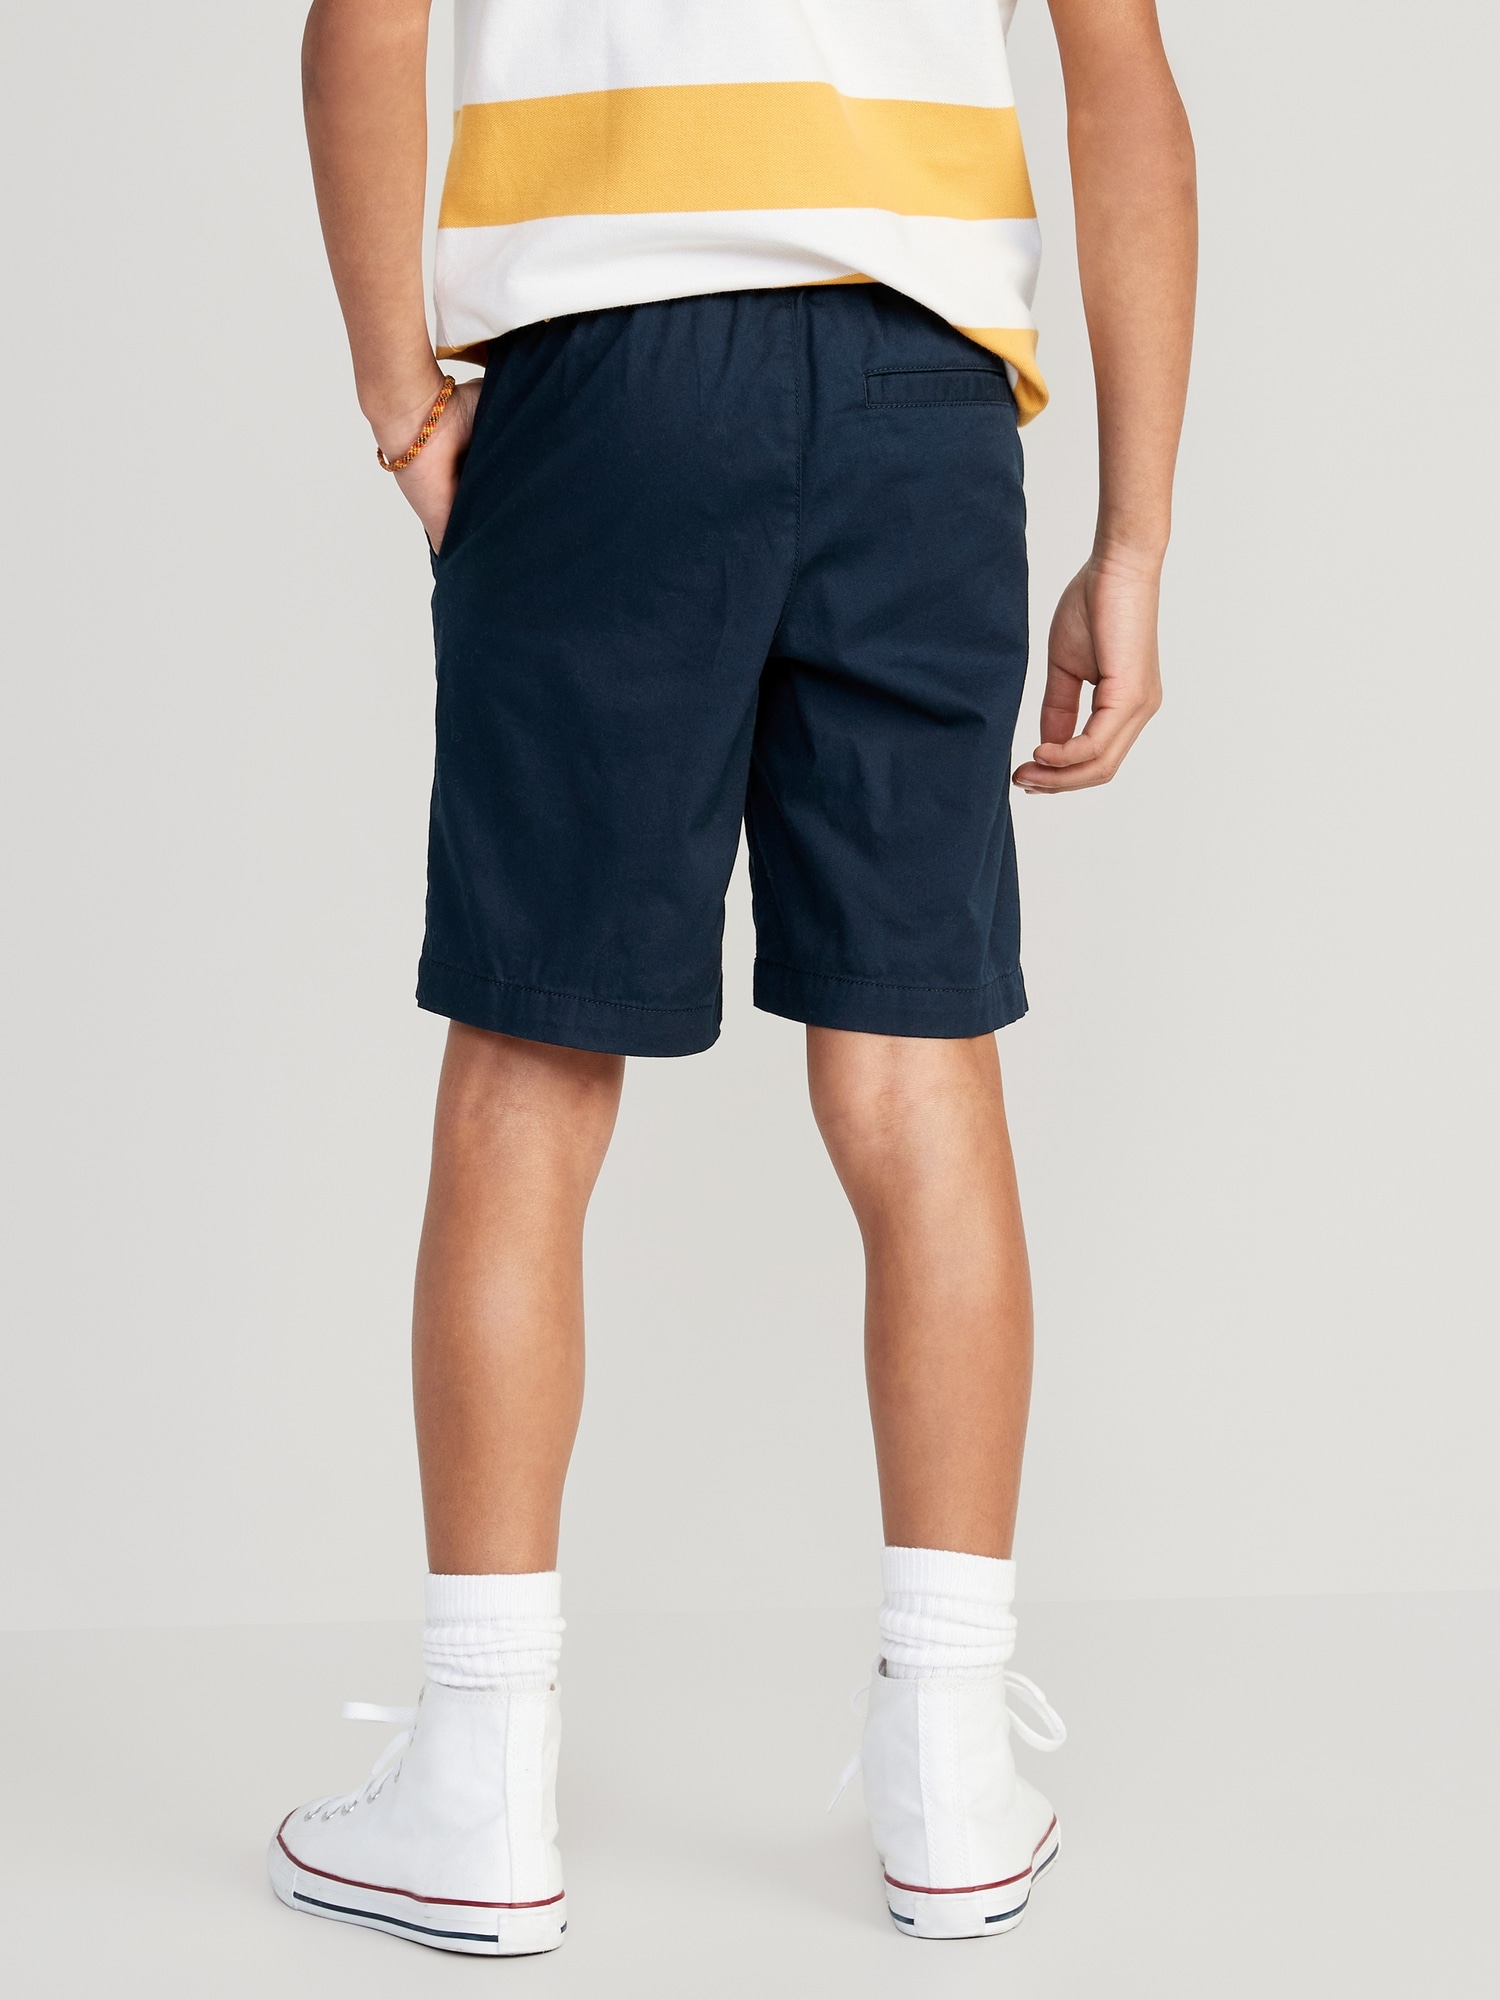 Old Navy Kids Built-In Flex Straight Twill Shorts for Boys (At